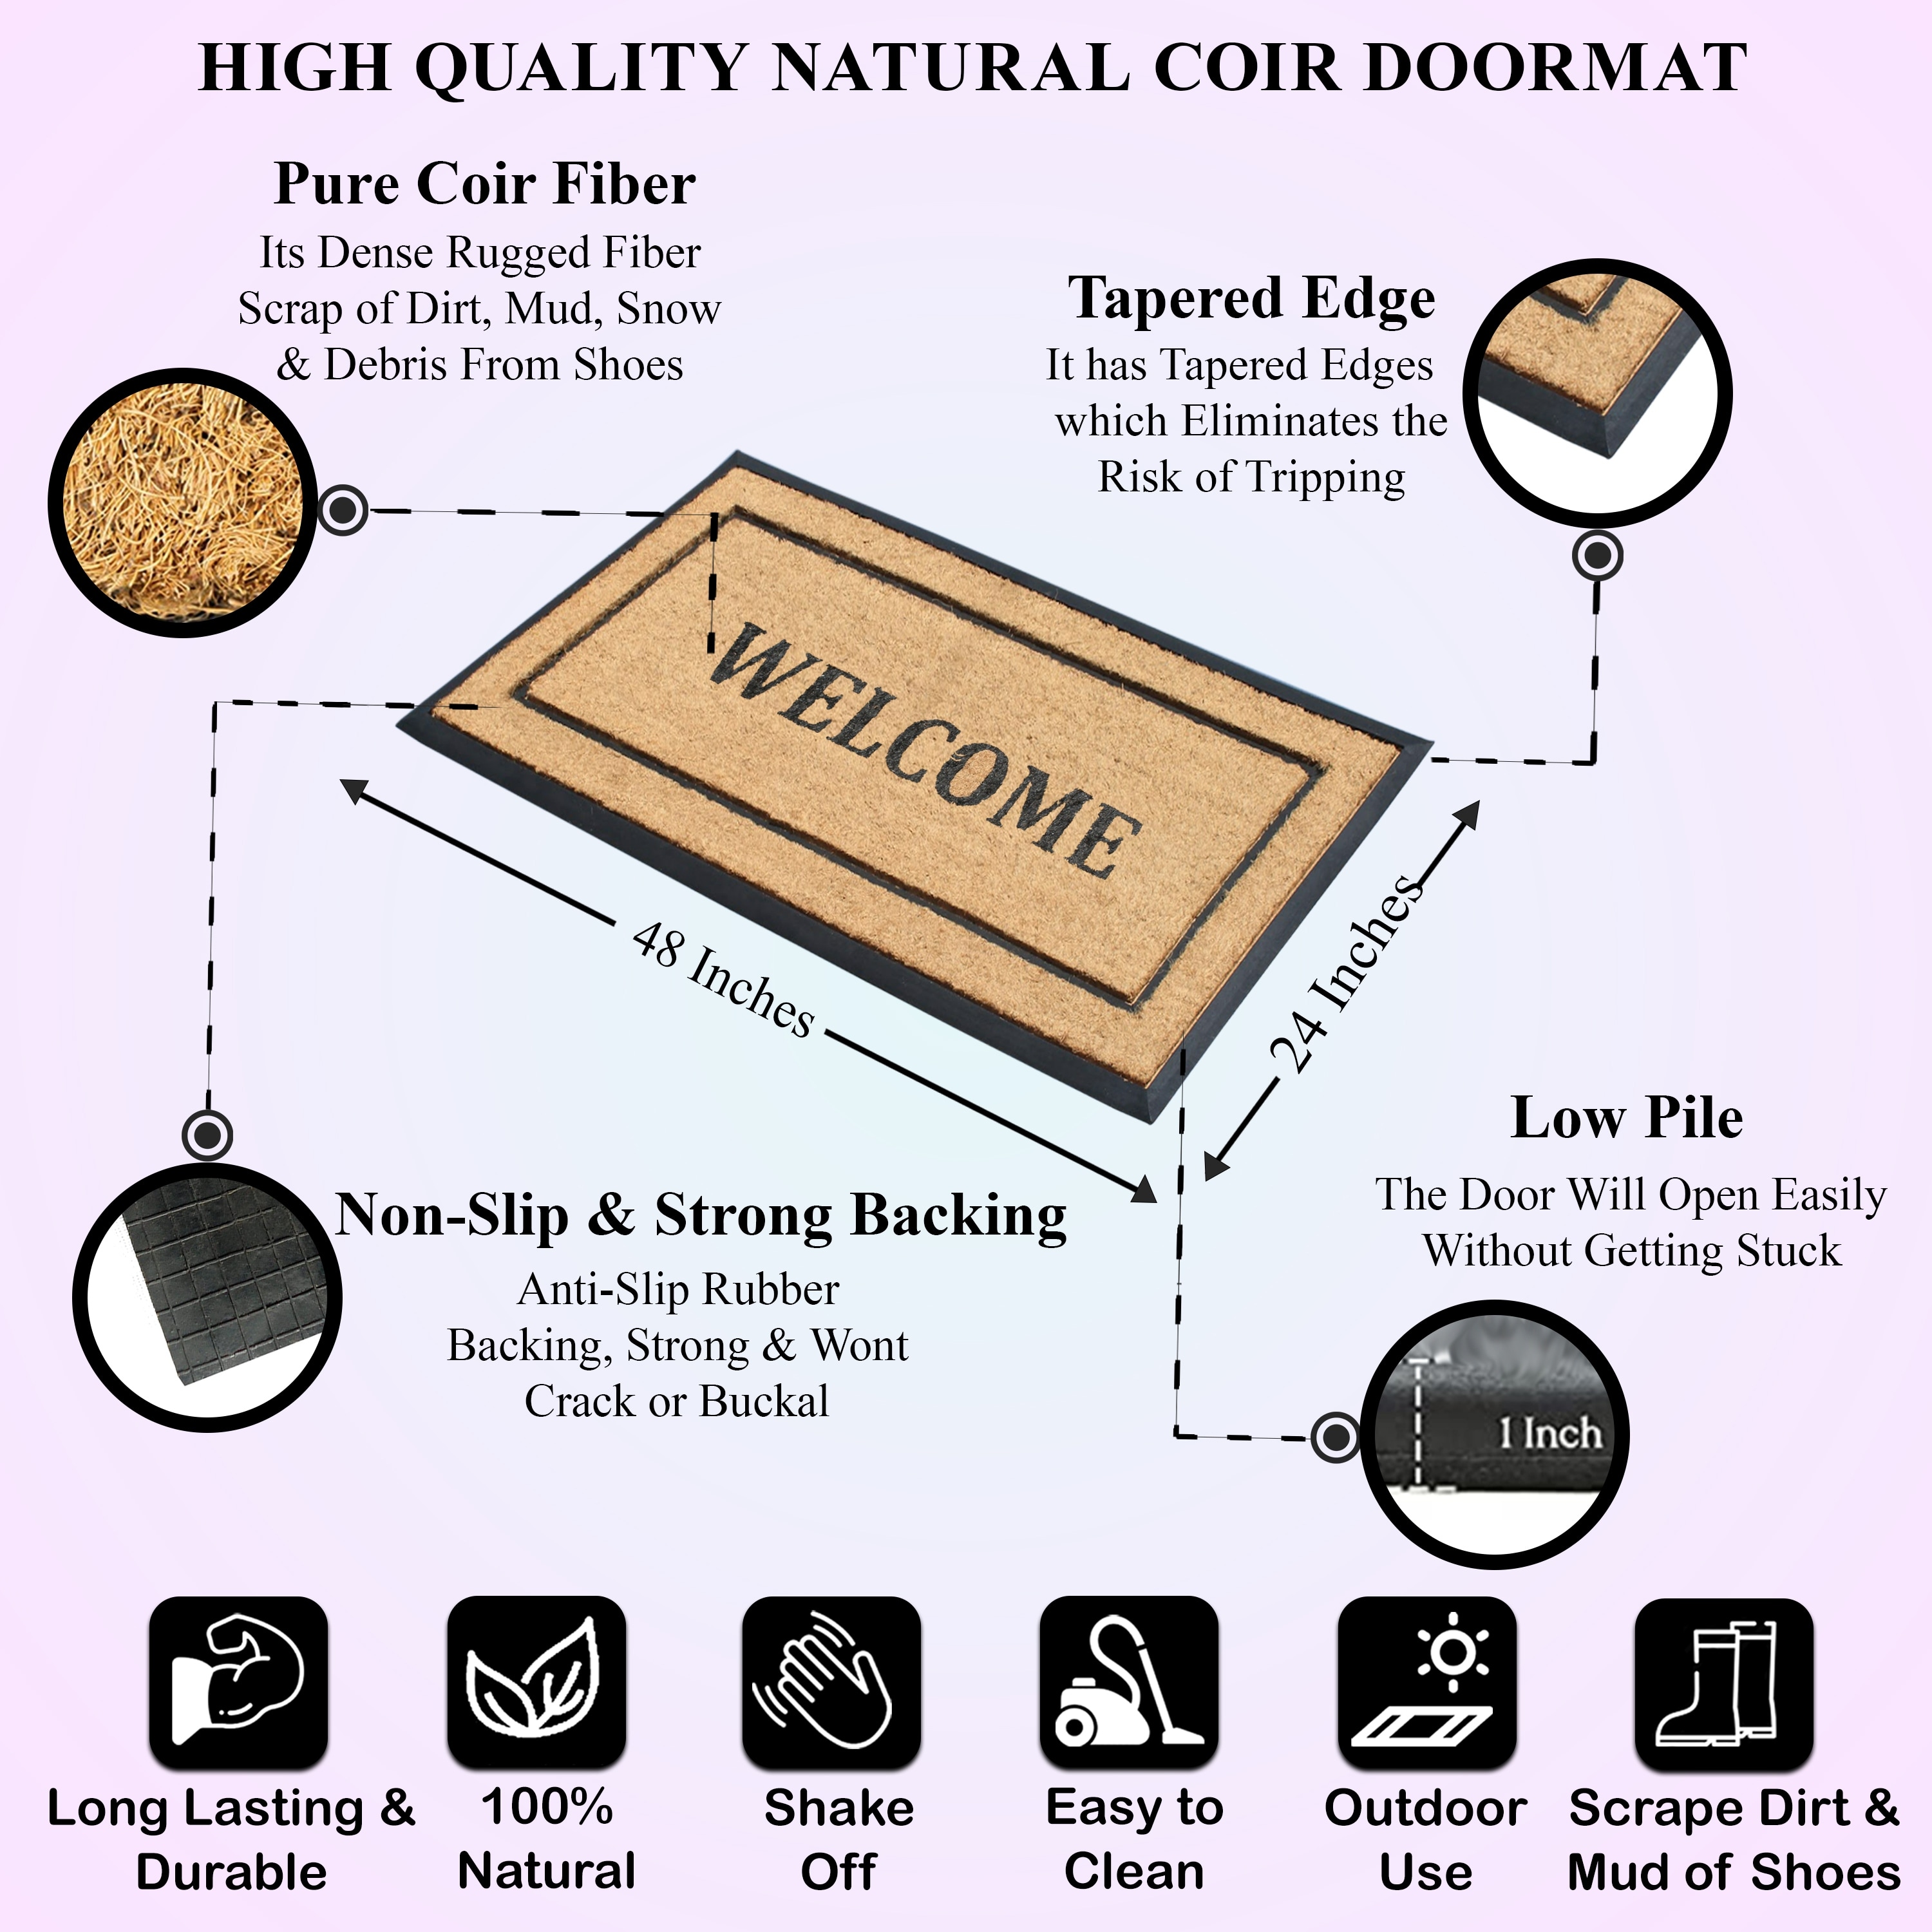 https://ak1.ostkcdn.com/images/products/is/images/direct/90f42c12750a68bea8c34a447f60011821158f38/A1HC-Entrance-Door-Mats%2C-24%22-x-48%22%2C-Durable-Large-Outdoor-Rug%2C-Rubber-Backed-Thin-Profile-Heavy-Non-Slip-Welcome-Doormat.jpg